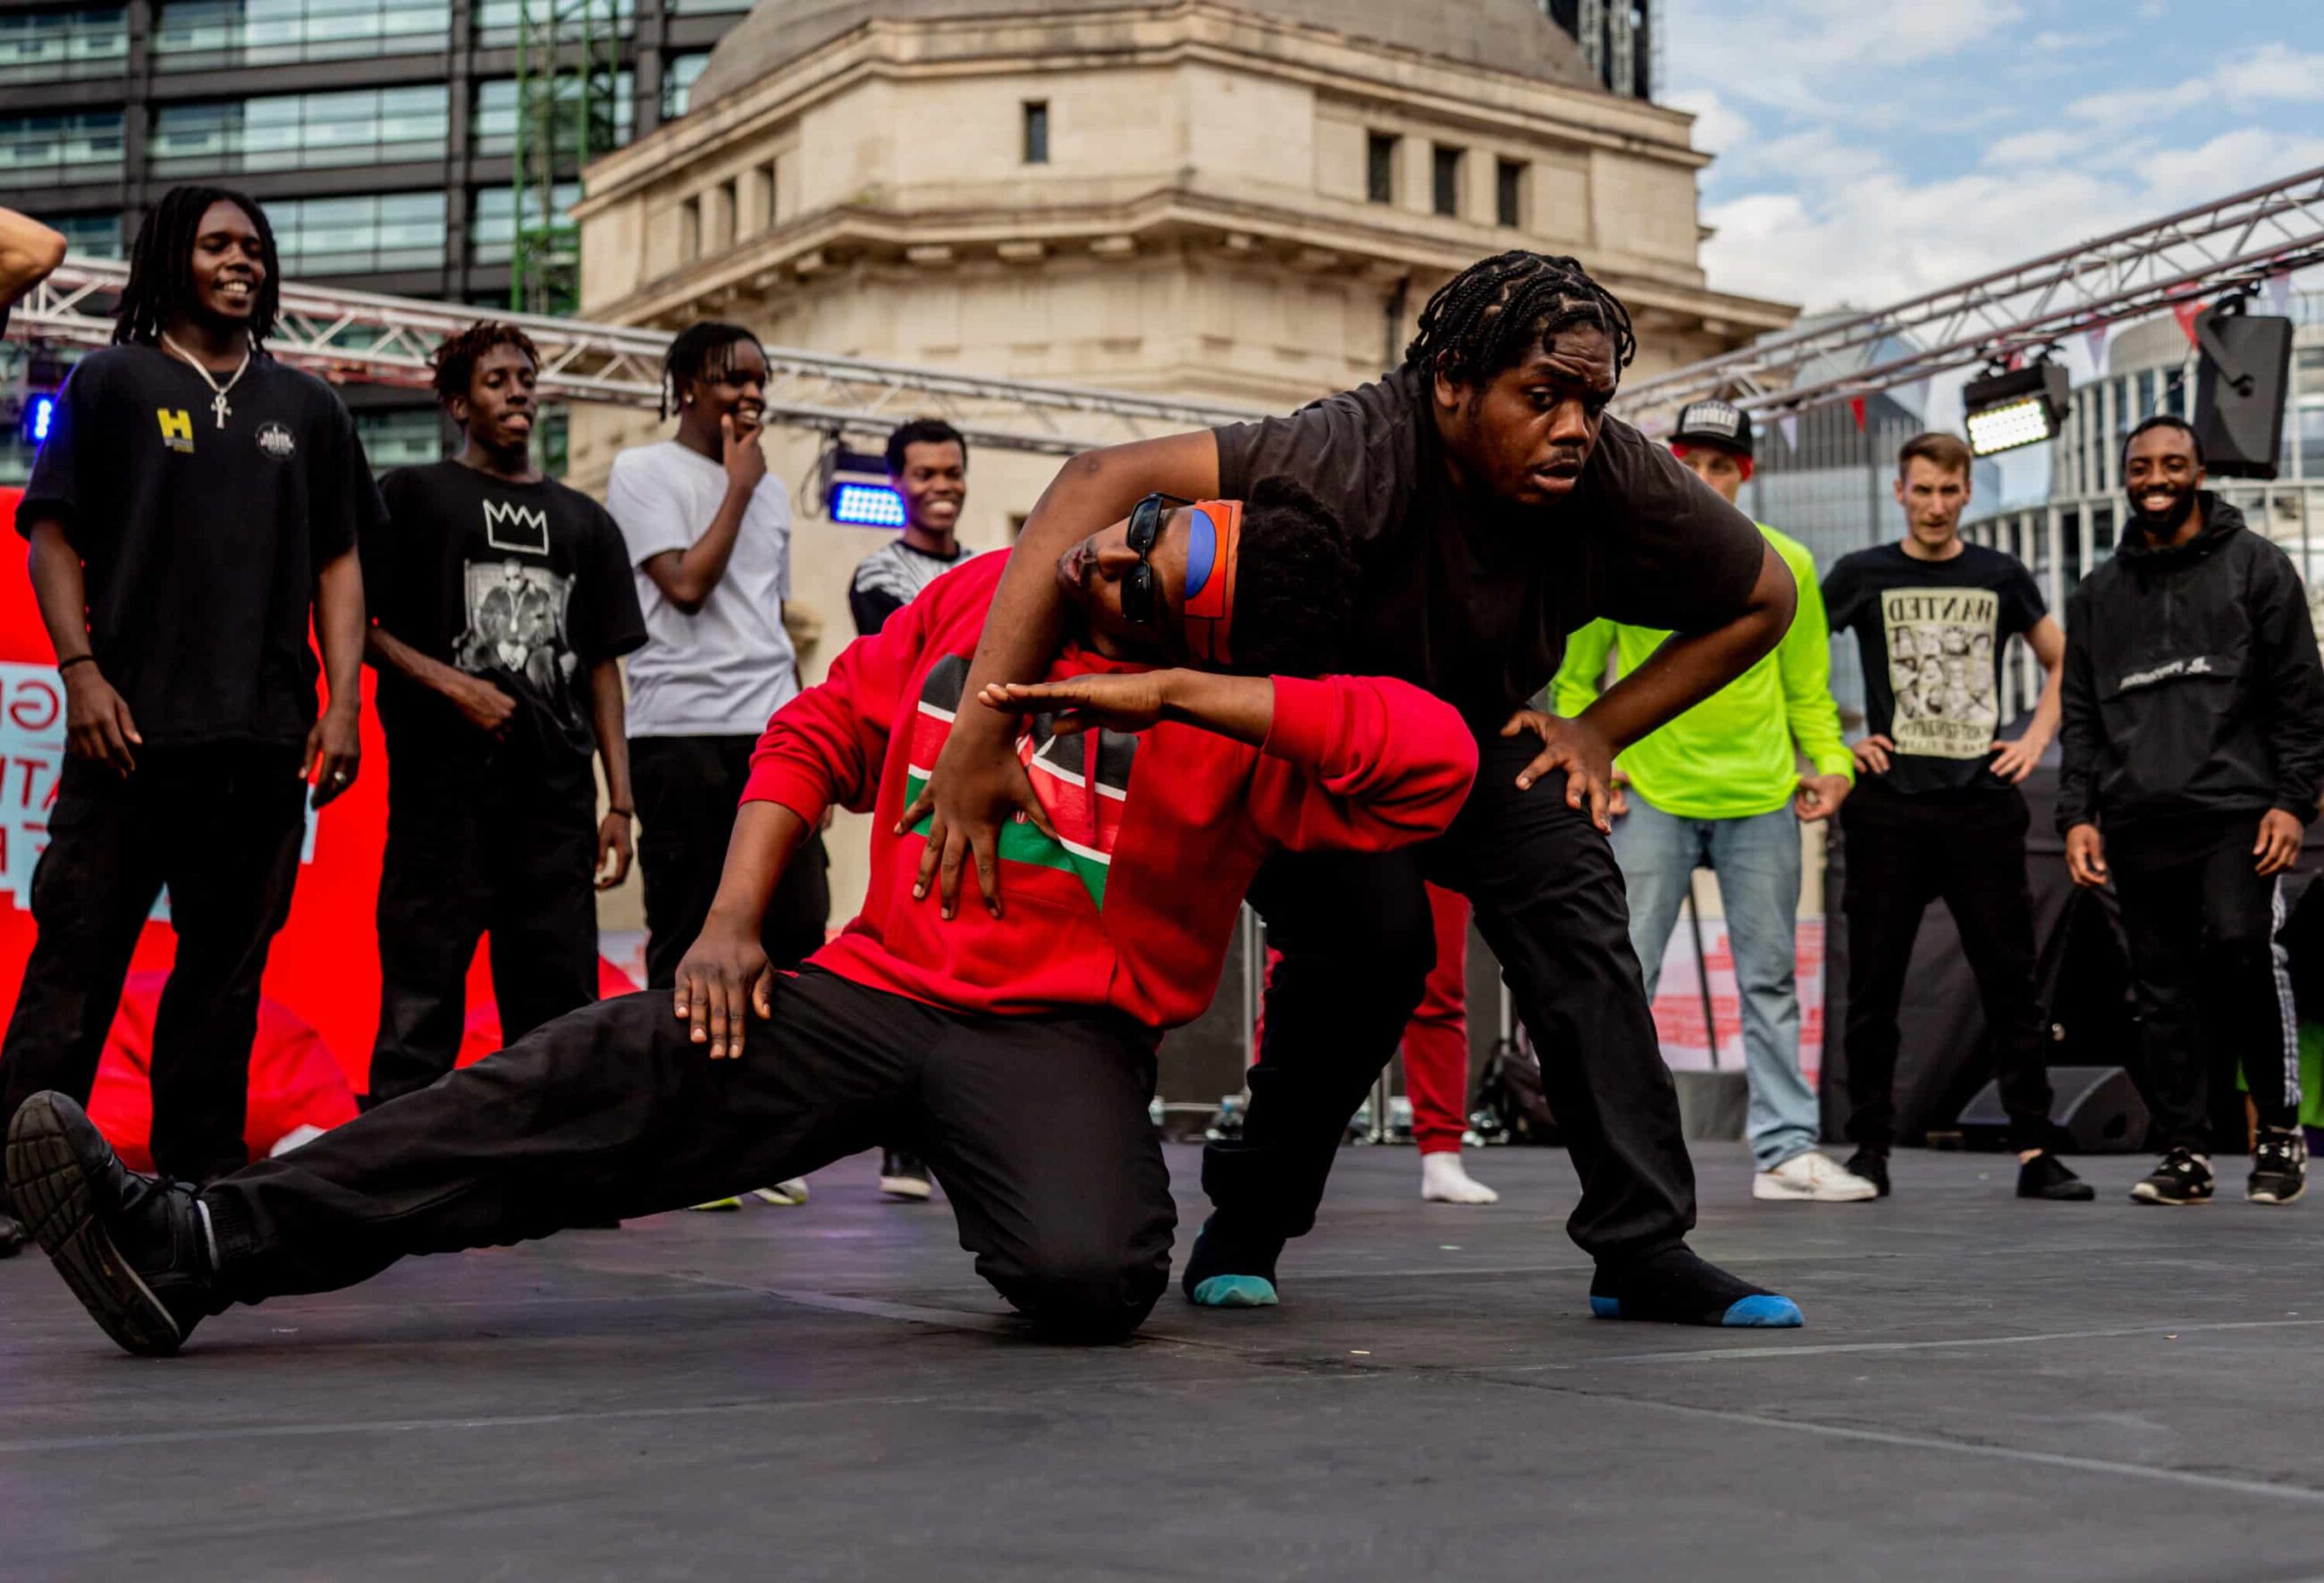 Two dancers battle in the middle of a circle of people in an outdoor space.